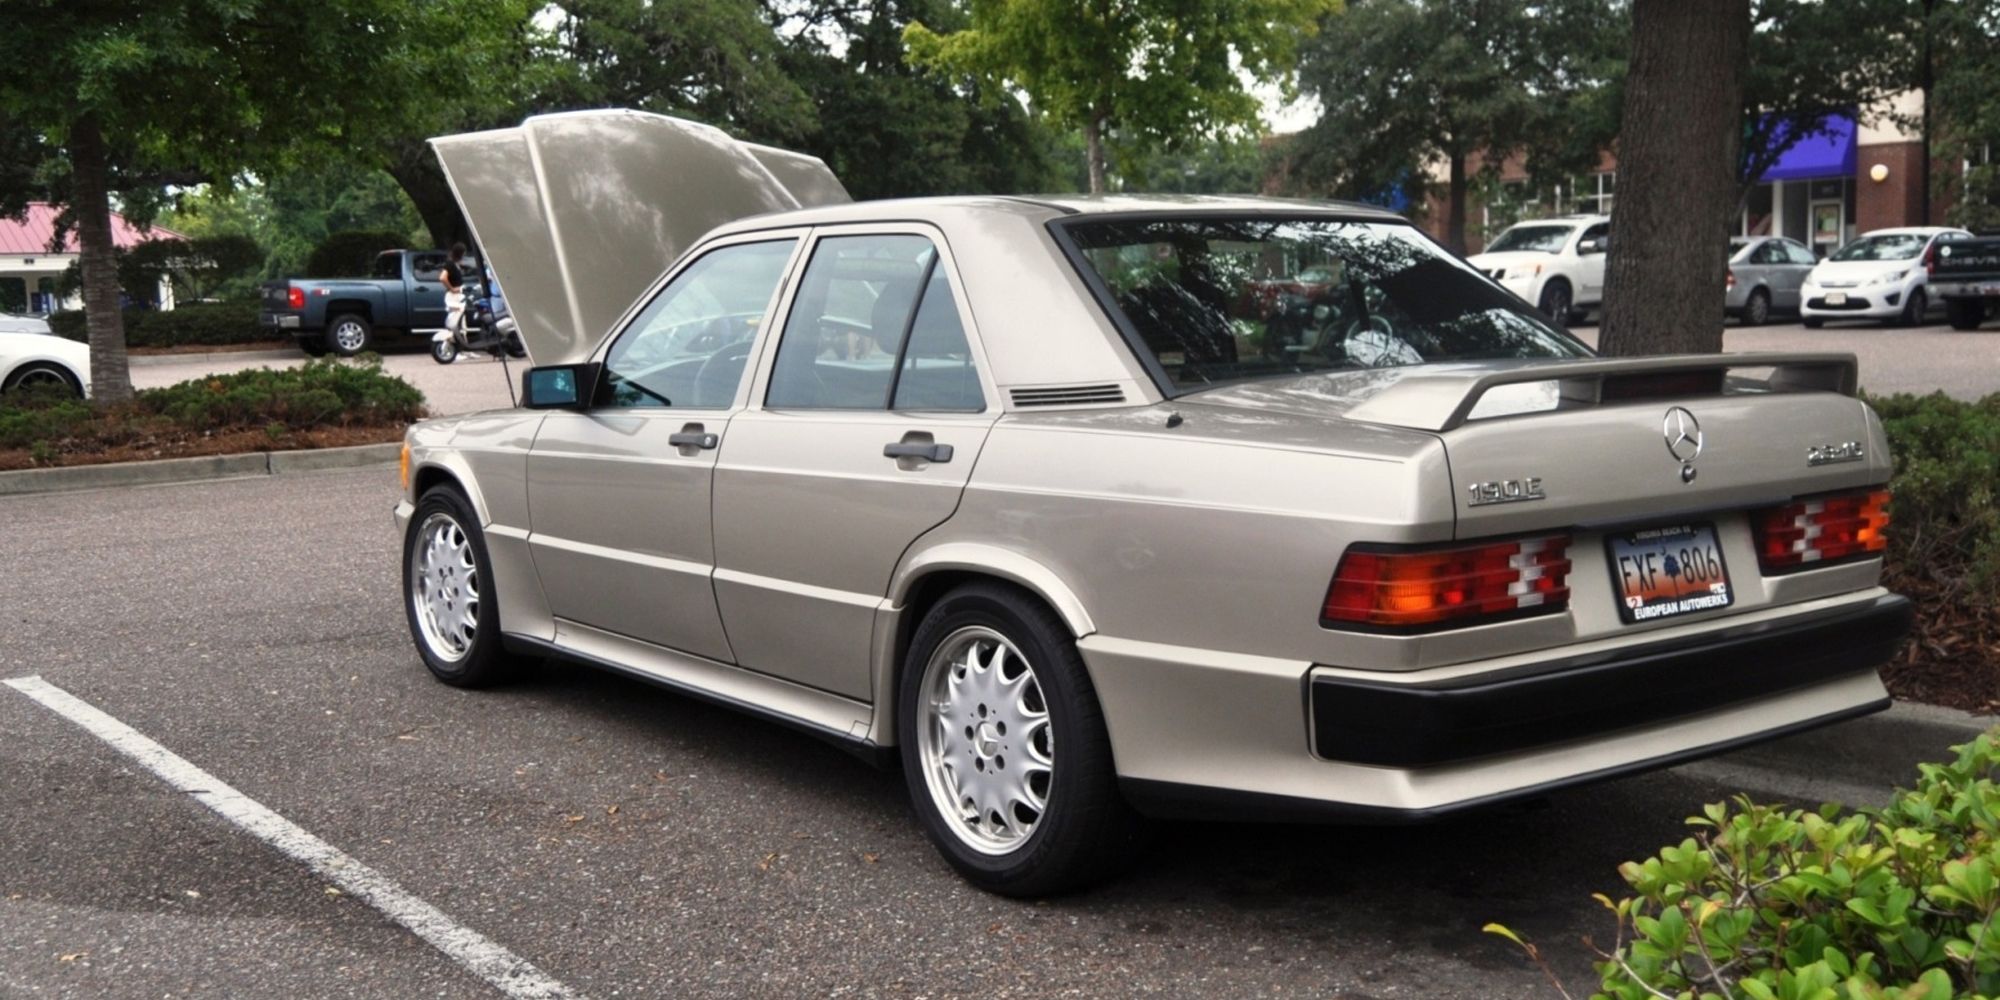 The rear of the 190E with the hood up